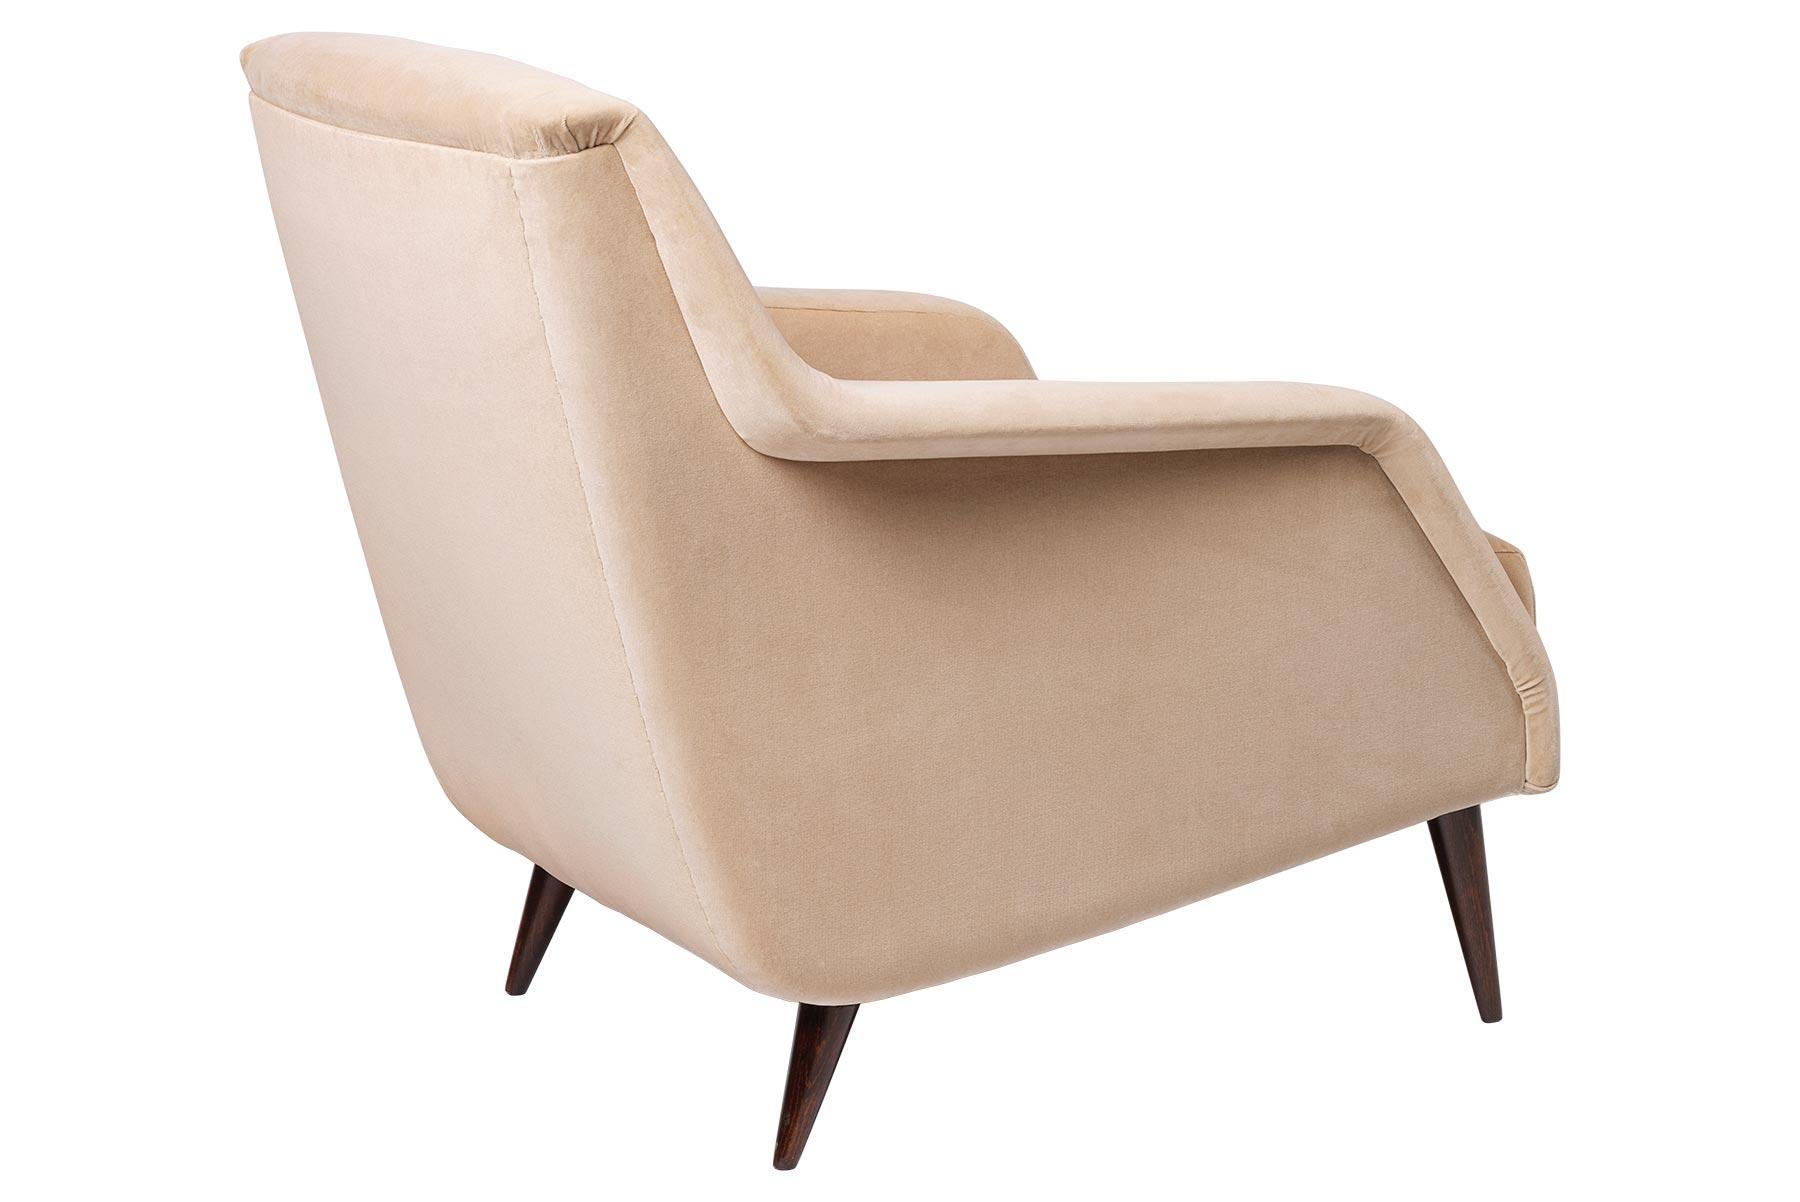 CDC.1 lounge chair was designed by Carlo de Carli in 1954 and features the elegantly Minimalist design style, typical of the era. The CDC.1 lounge chair meets the ground in a graceful and slender way, its arms swooping like wings, giving the